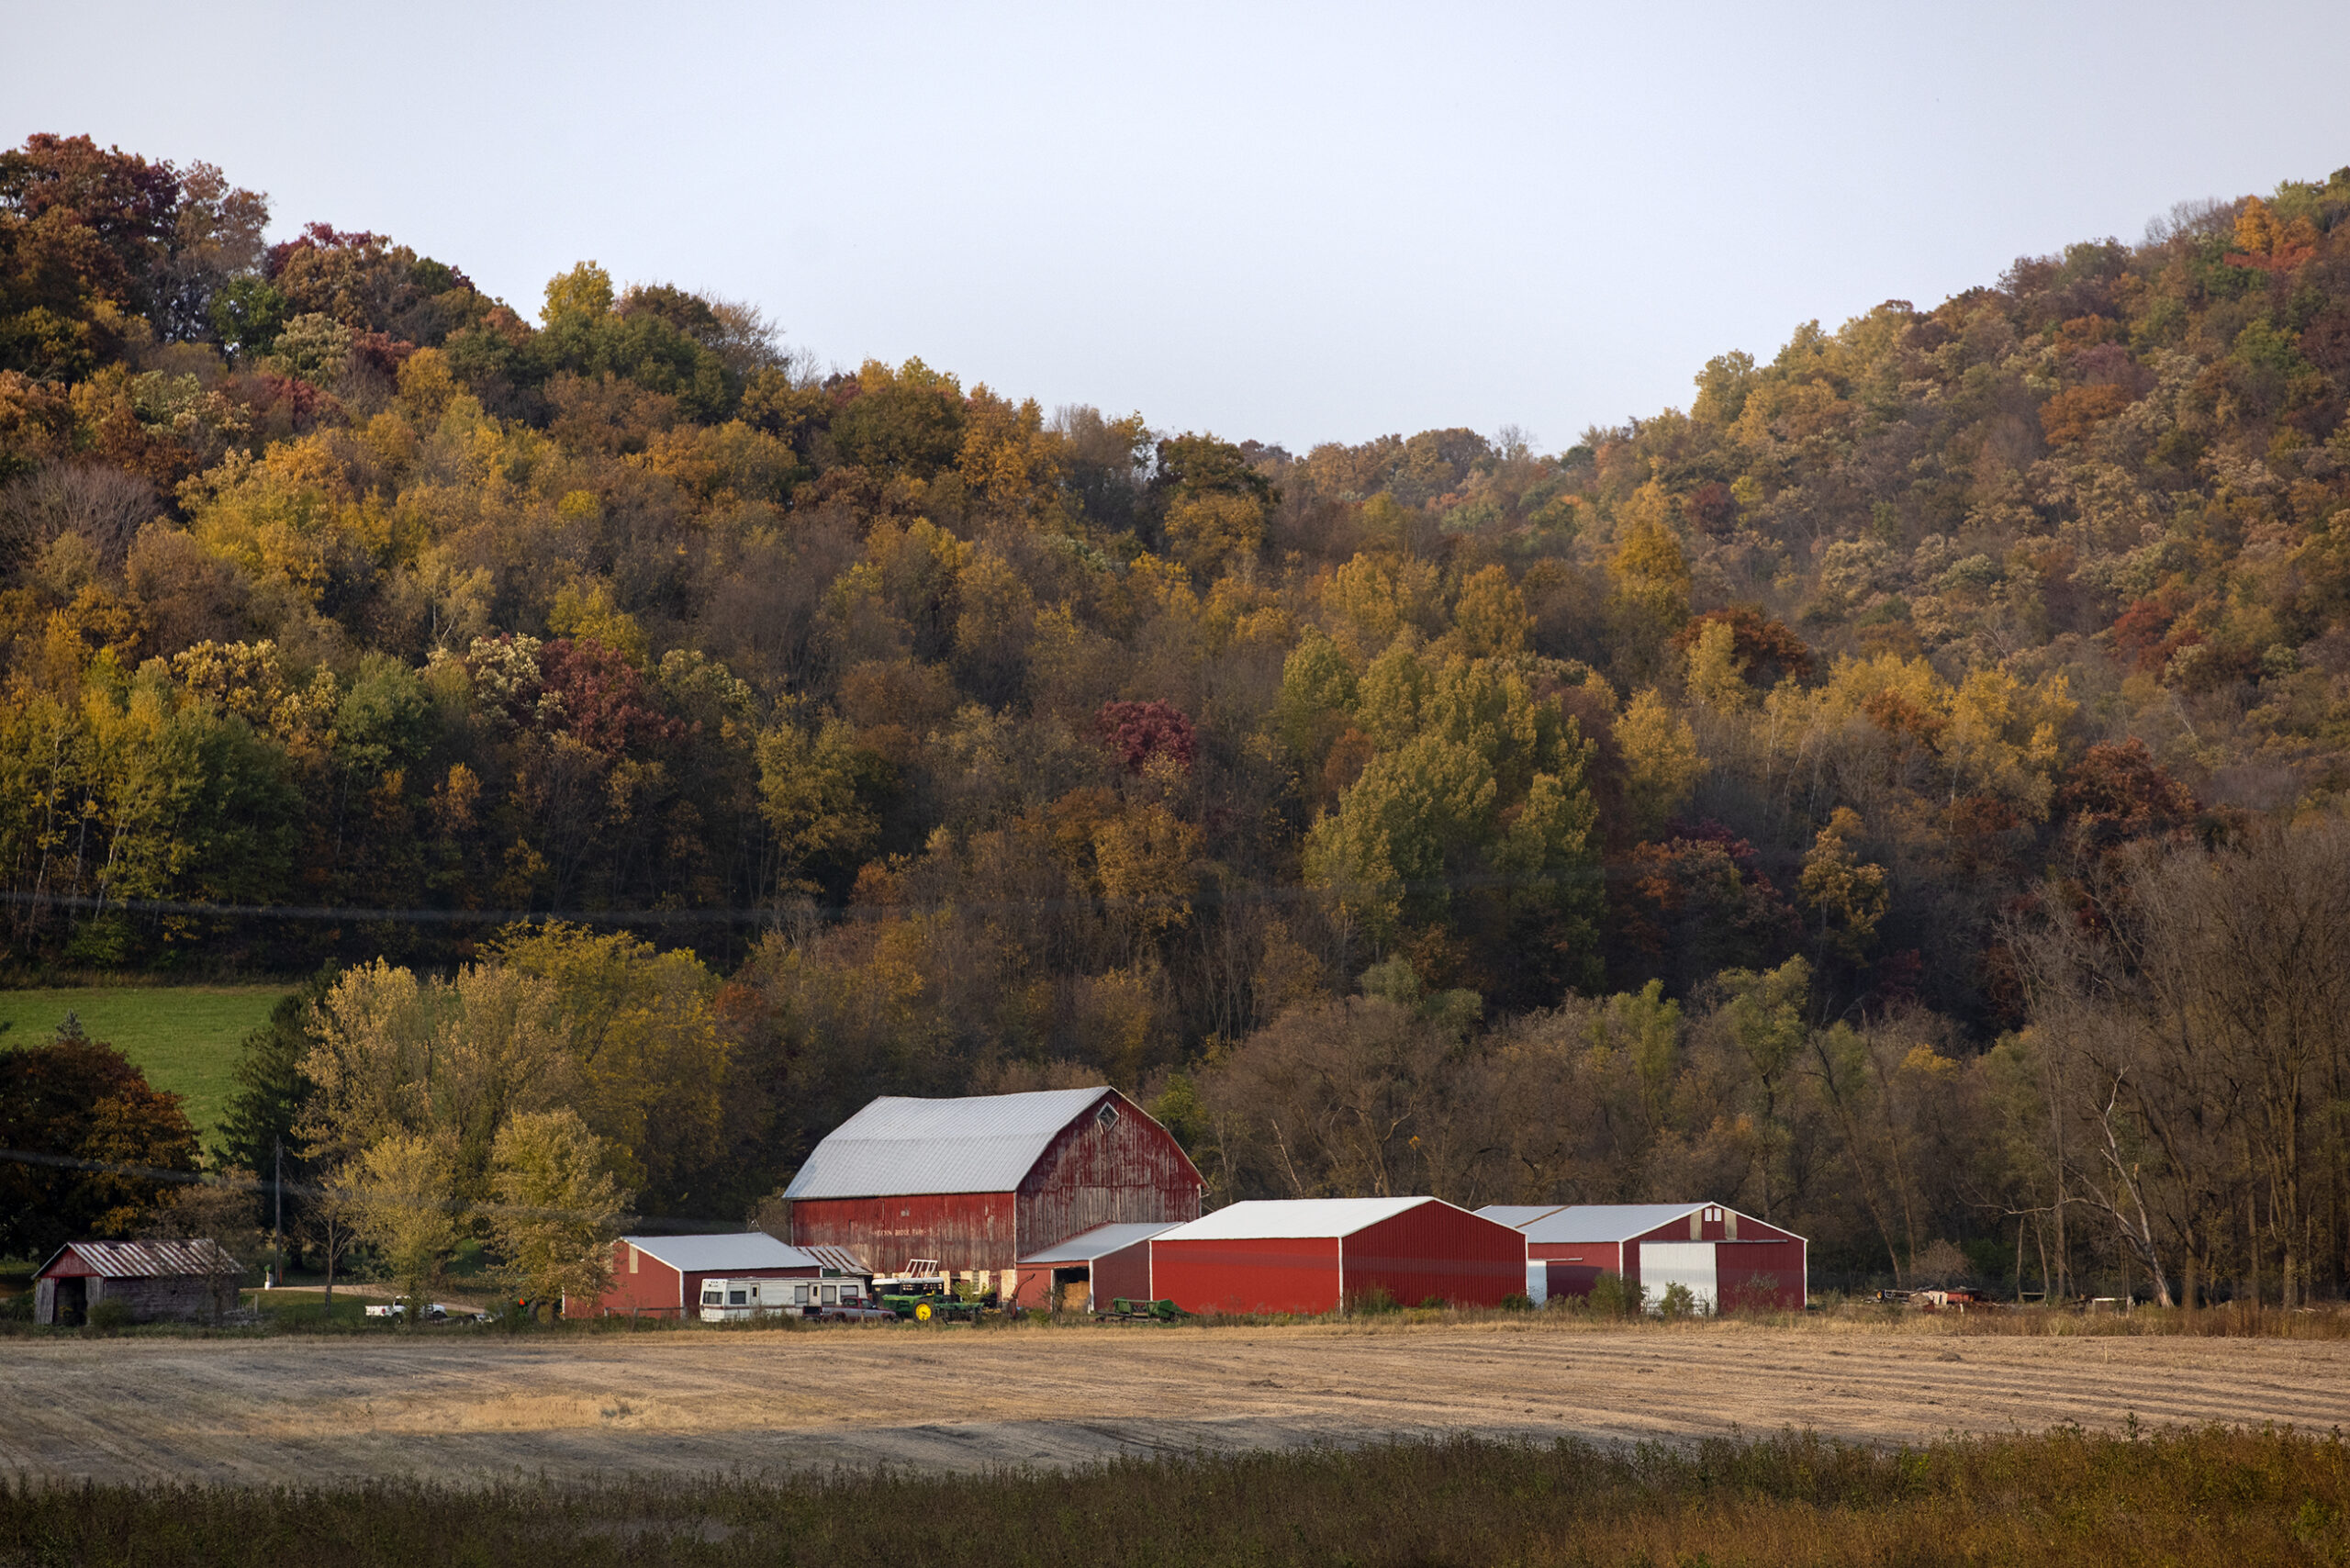 Hills with fall colors surround a red barn